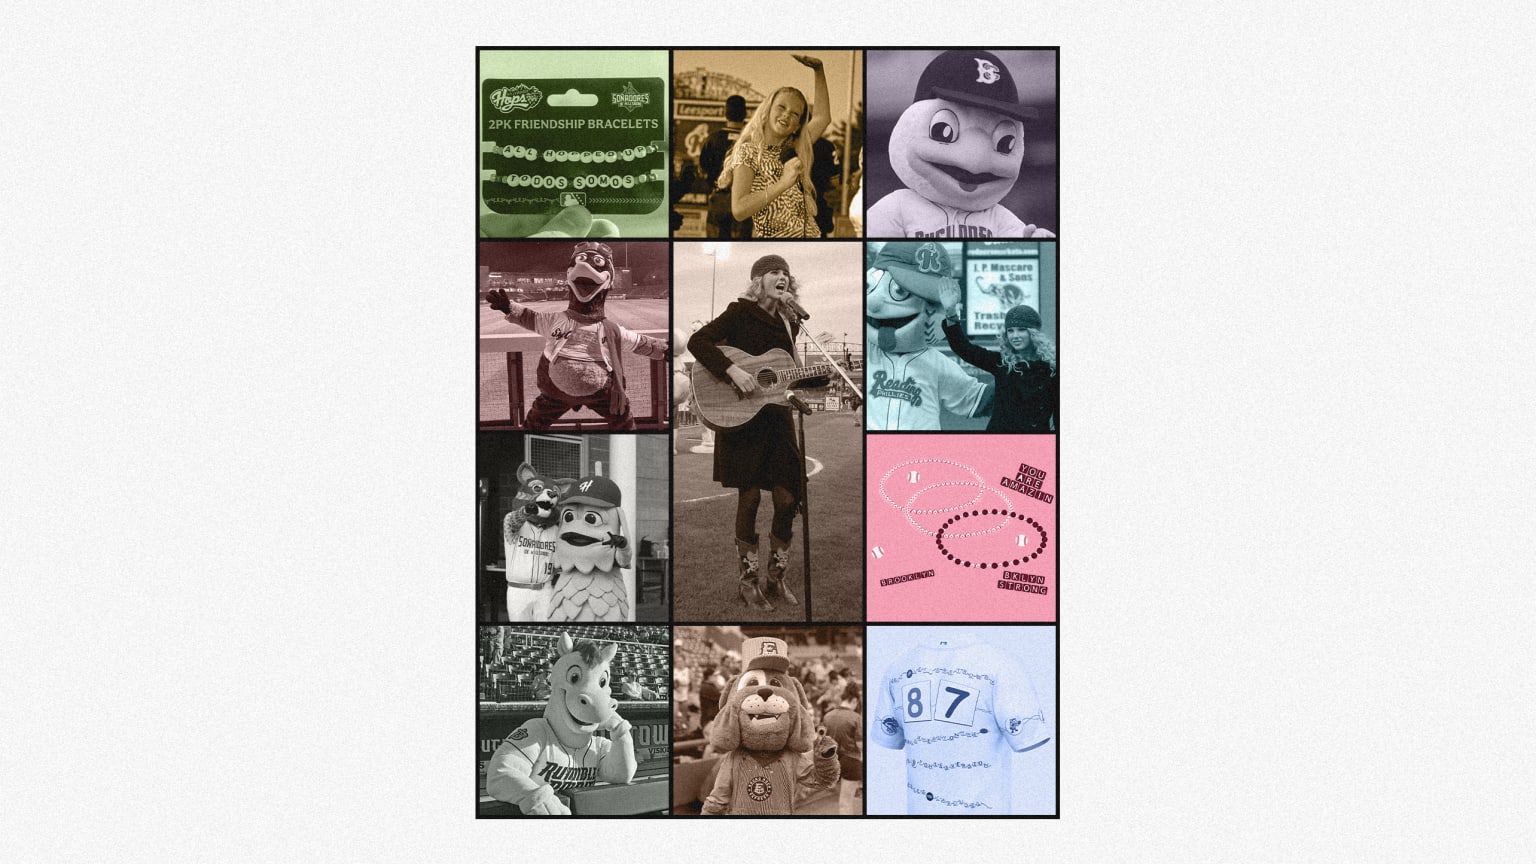 A mock album cover with photos of Taylor Swift and Minor League mascots